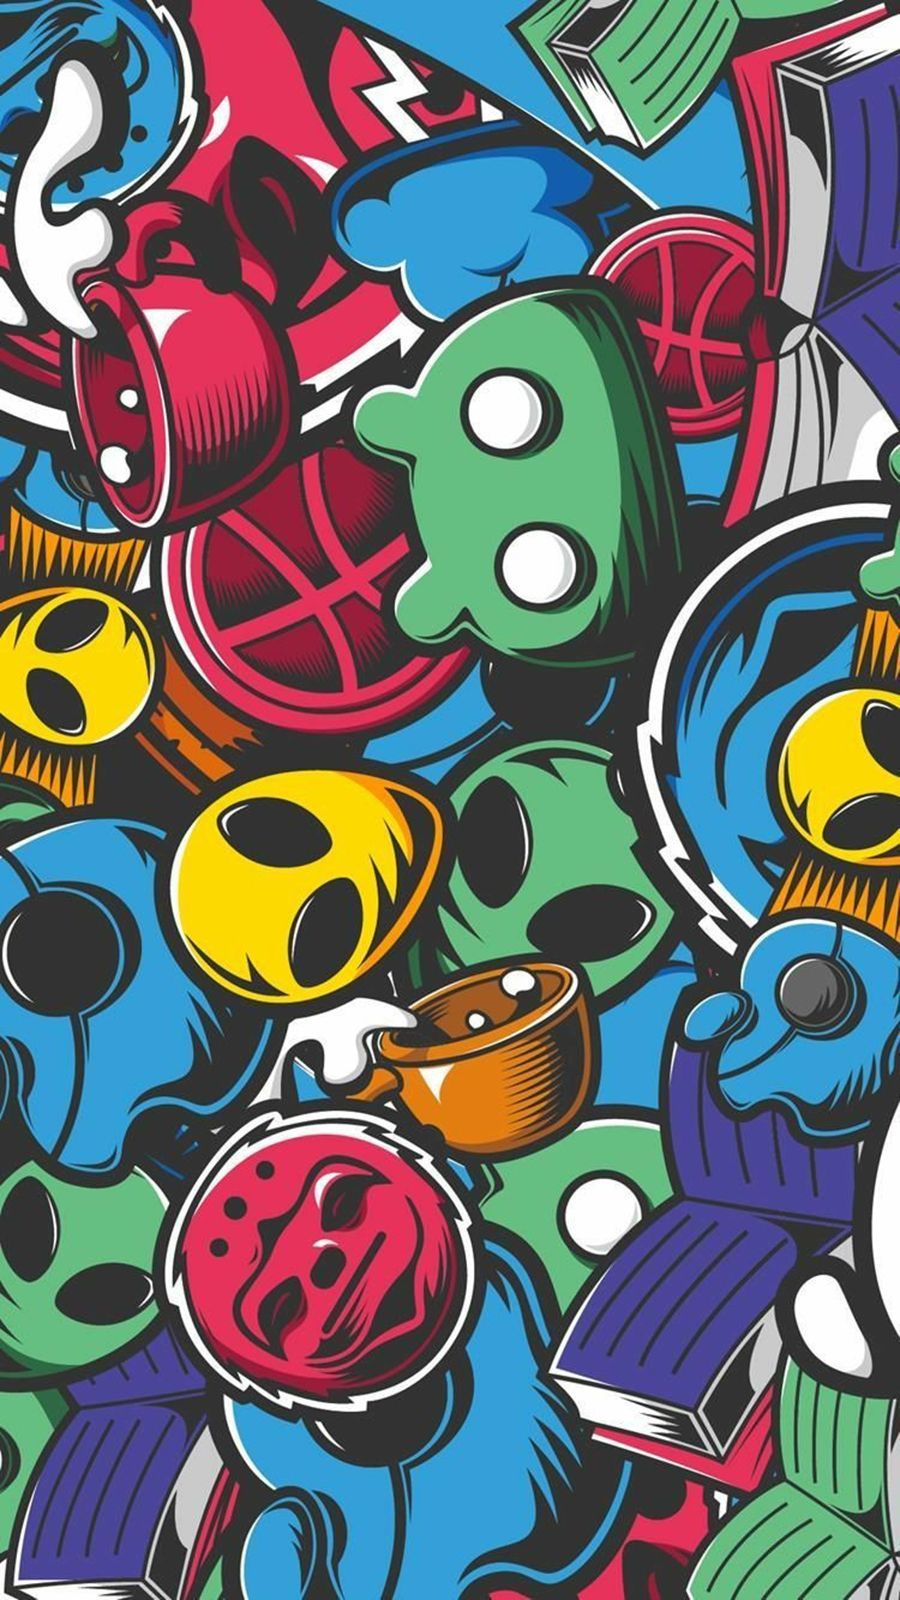 Best Wallpaper iPhone and Mobile 4K HD Wallpaper. Best HD Wallpaper. Graffiti wallpaper iphone, Graffiti wallpaper, Art wallpaper iphone